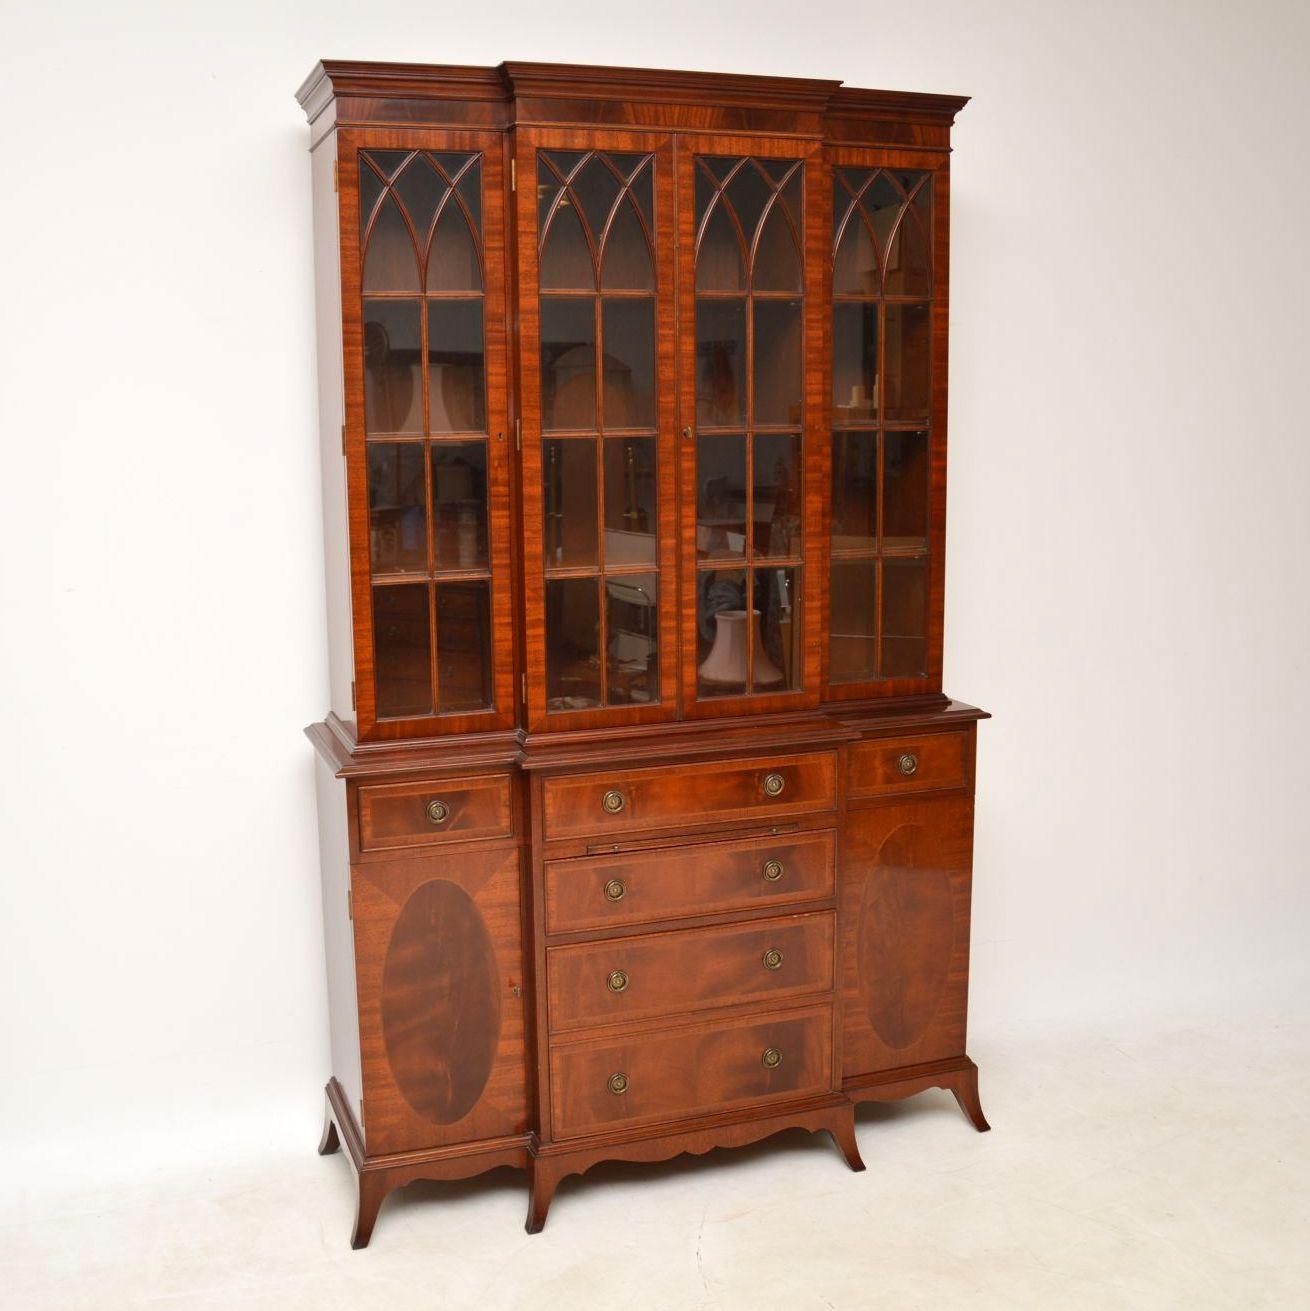 Antique George III style mahogany breakfront bookcase of very high quality, with smallish proportions and with some lovely features. I would say this bookcase is about 40-50 years old. The top section has four Gothic style astral glazed doors and